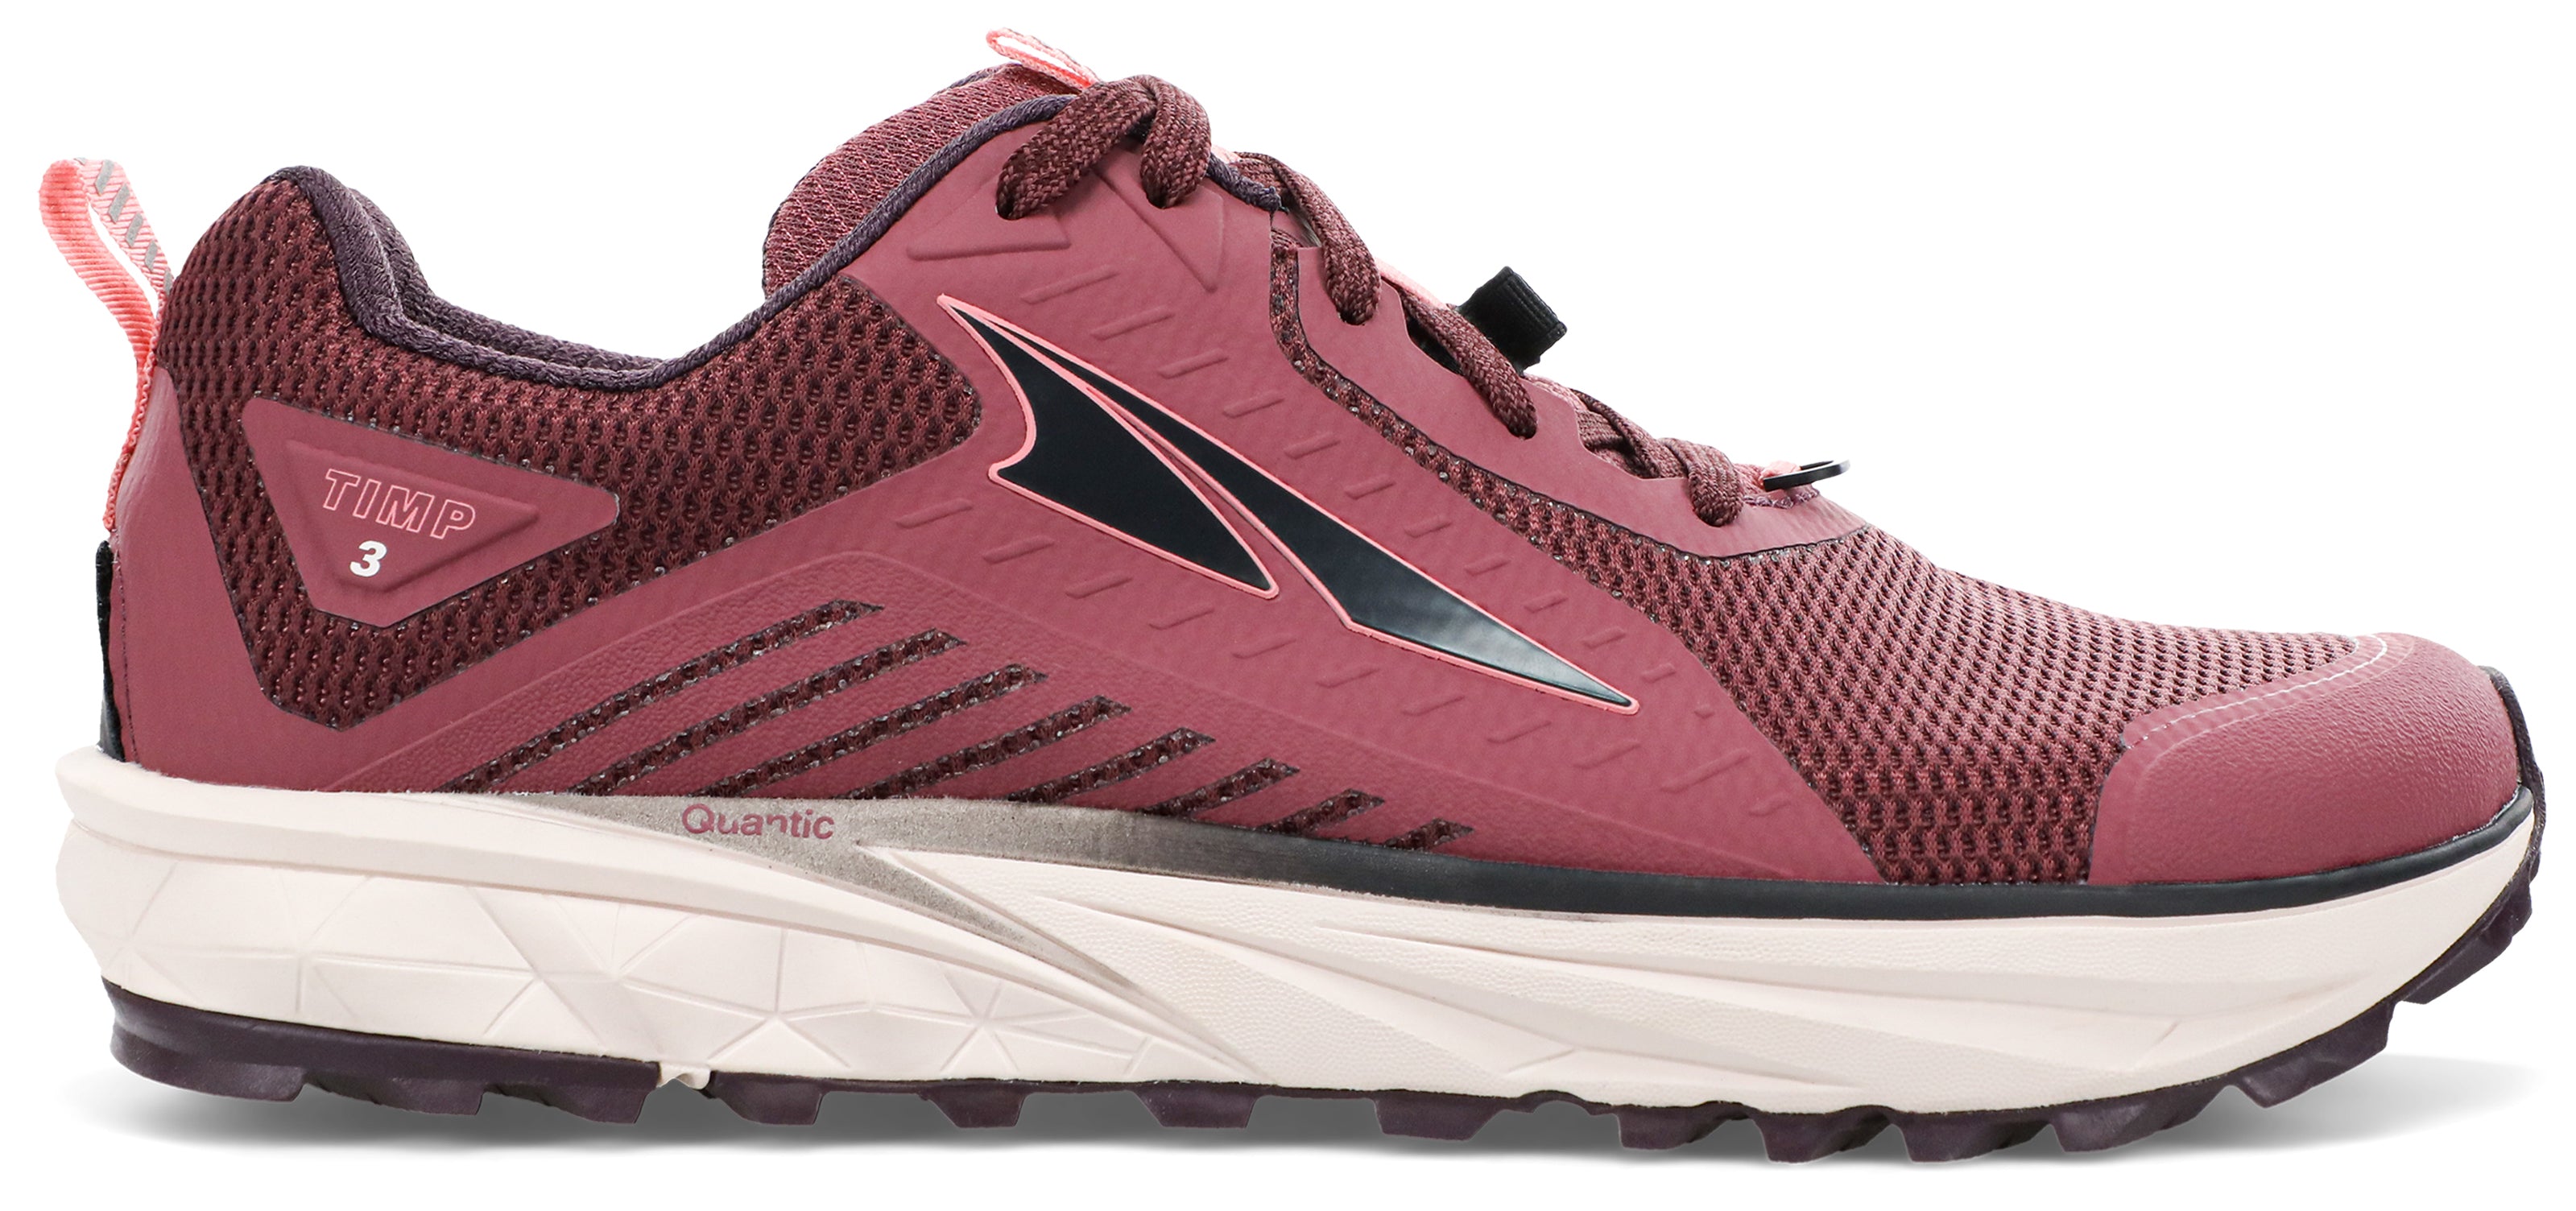 Women's Altra Timp 3 Trail Running Shoe in Plum/Coral from the side